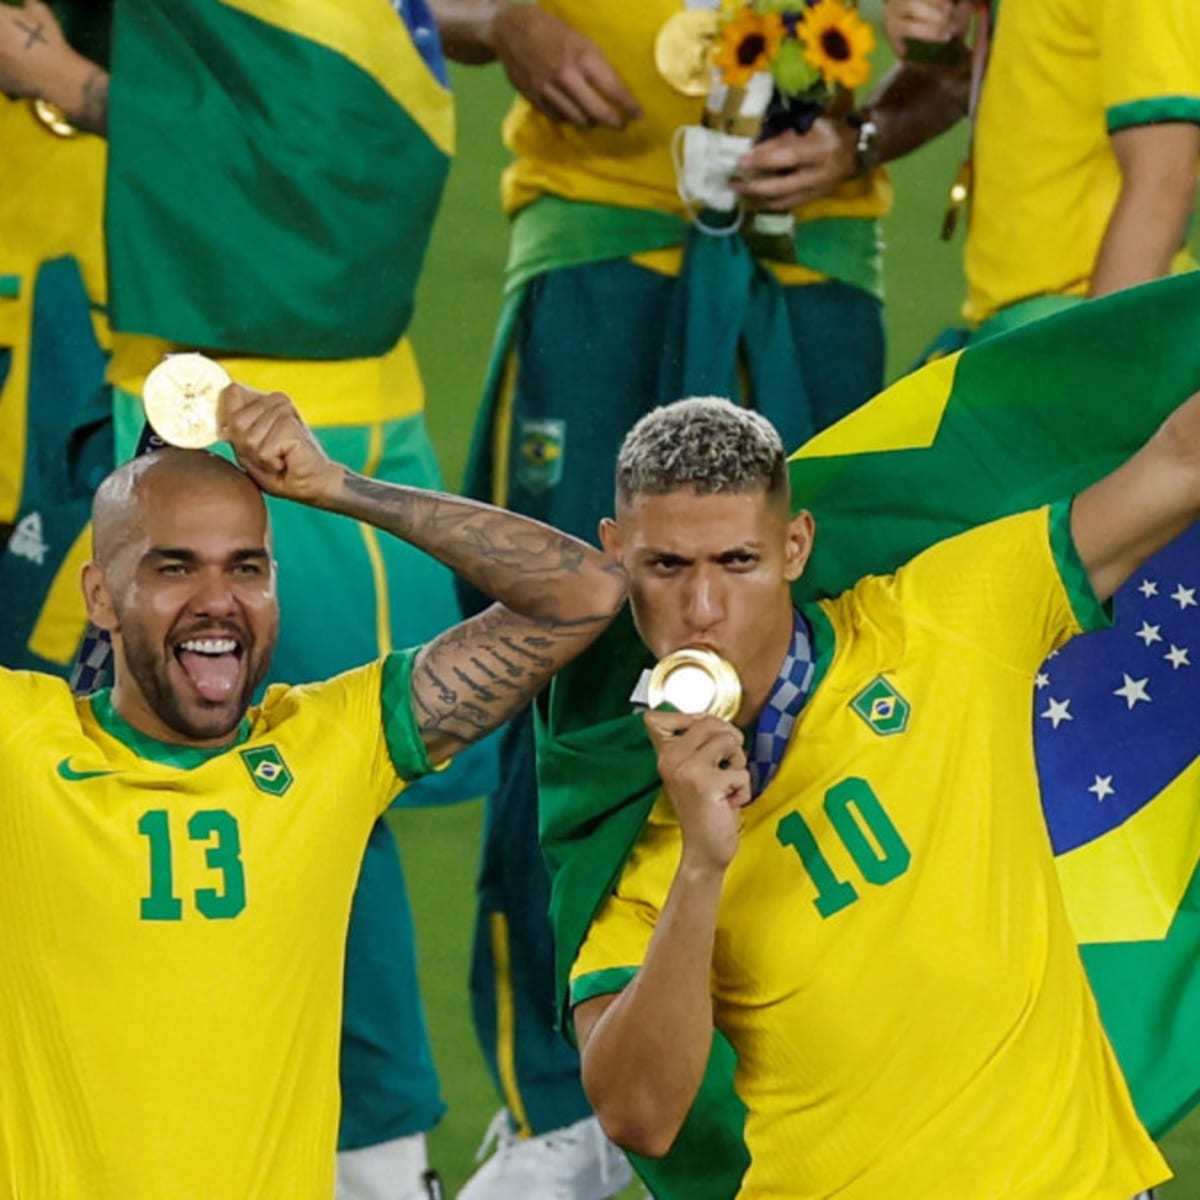 Brazil Beats Spain in Extra Time for Second Straight Olympic Gold